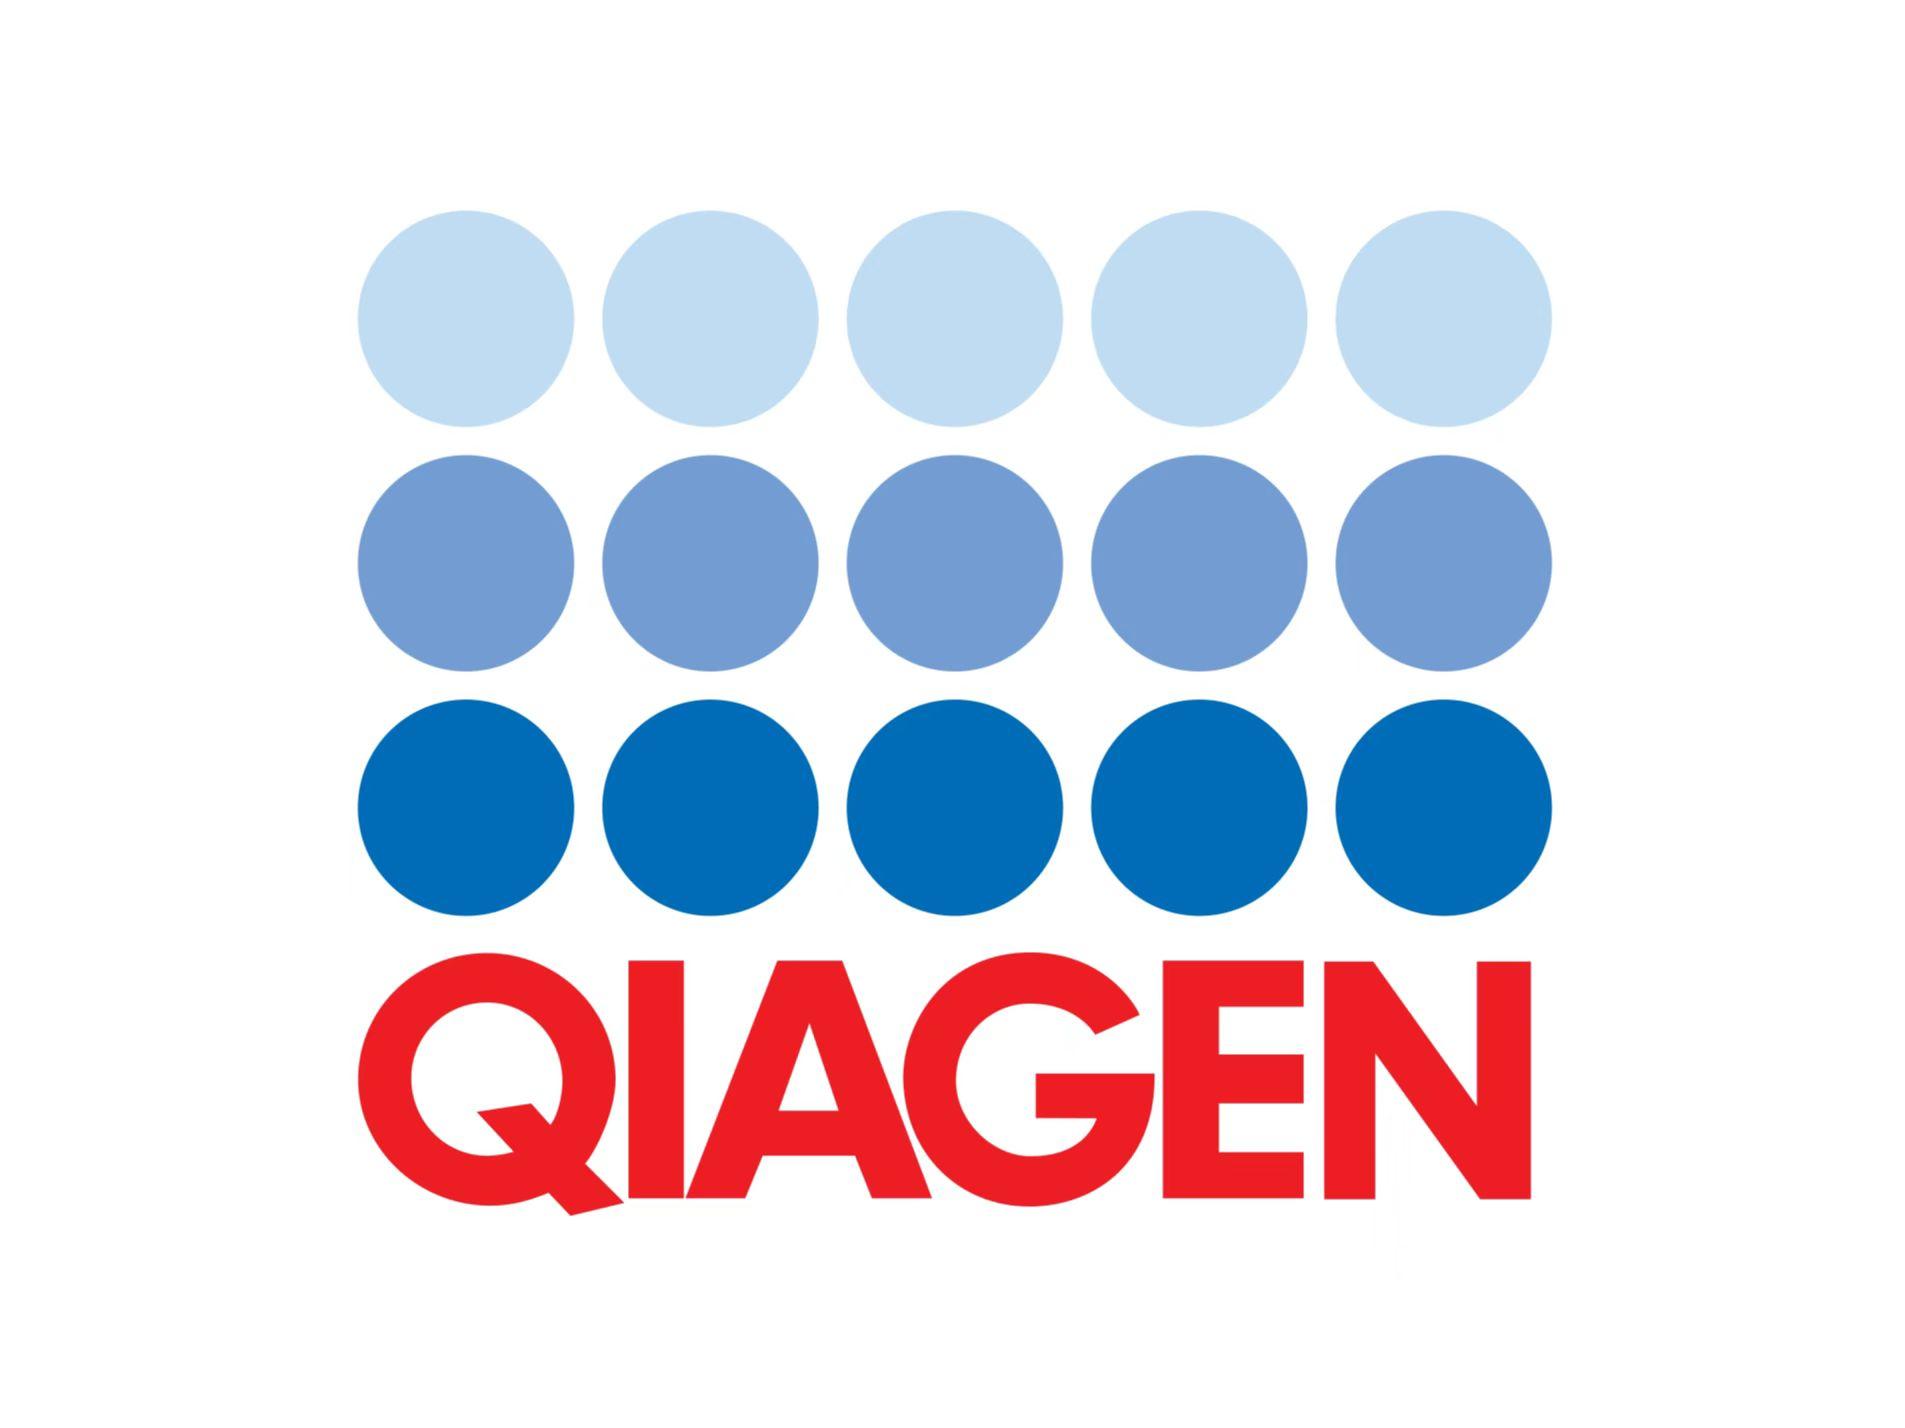 QIAGEN receives FDA approval for companion diagnostic to Blueprint Medicines’ AYVAKIT® (avapritinib) in gastrointestinal stromal tumors